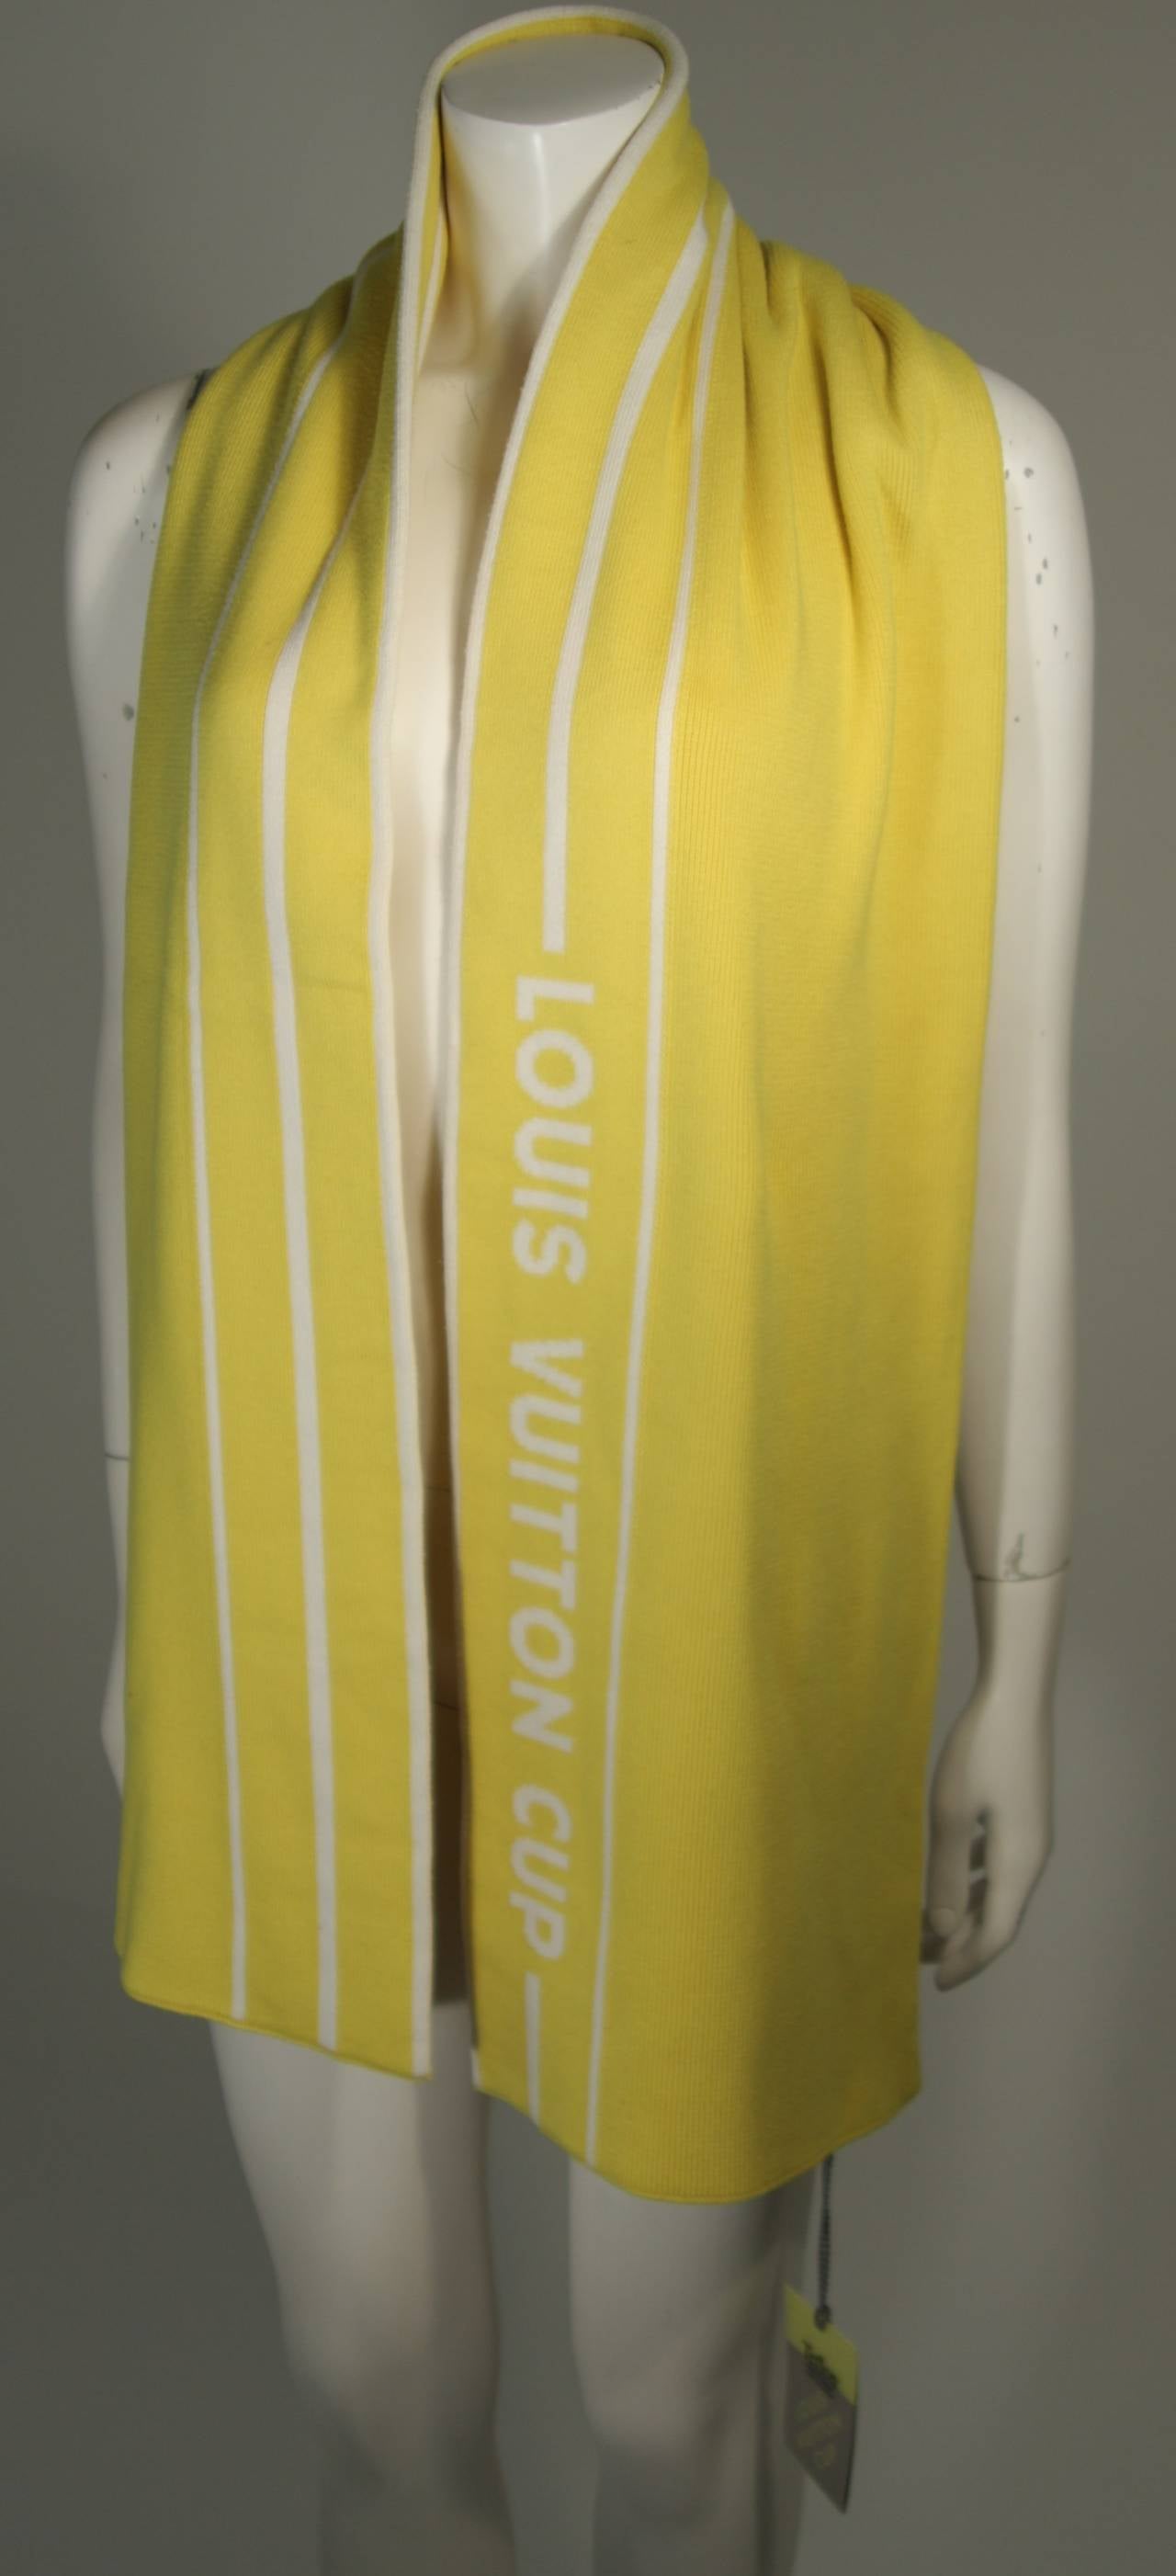 This Louis Vuitton cup scarf is composed of a thick yellow cashmere 15% and  85% cotton blend fabric. In excellent condition, comes with original tags. Made in Italy. 

**The size in the description box is an estimation; please cross-reference